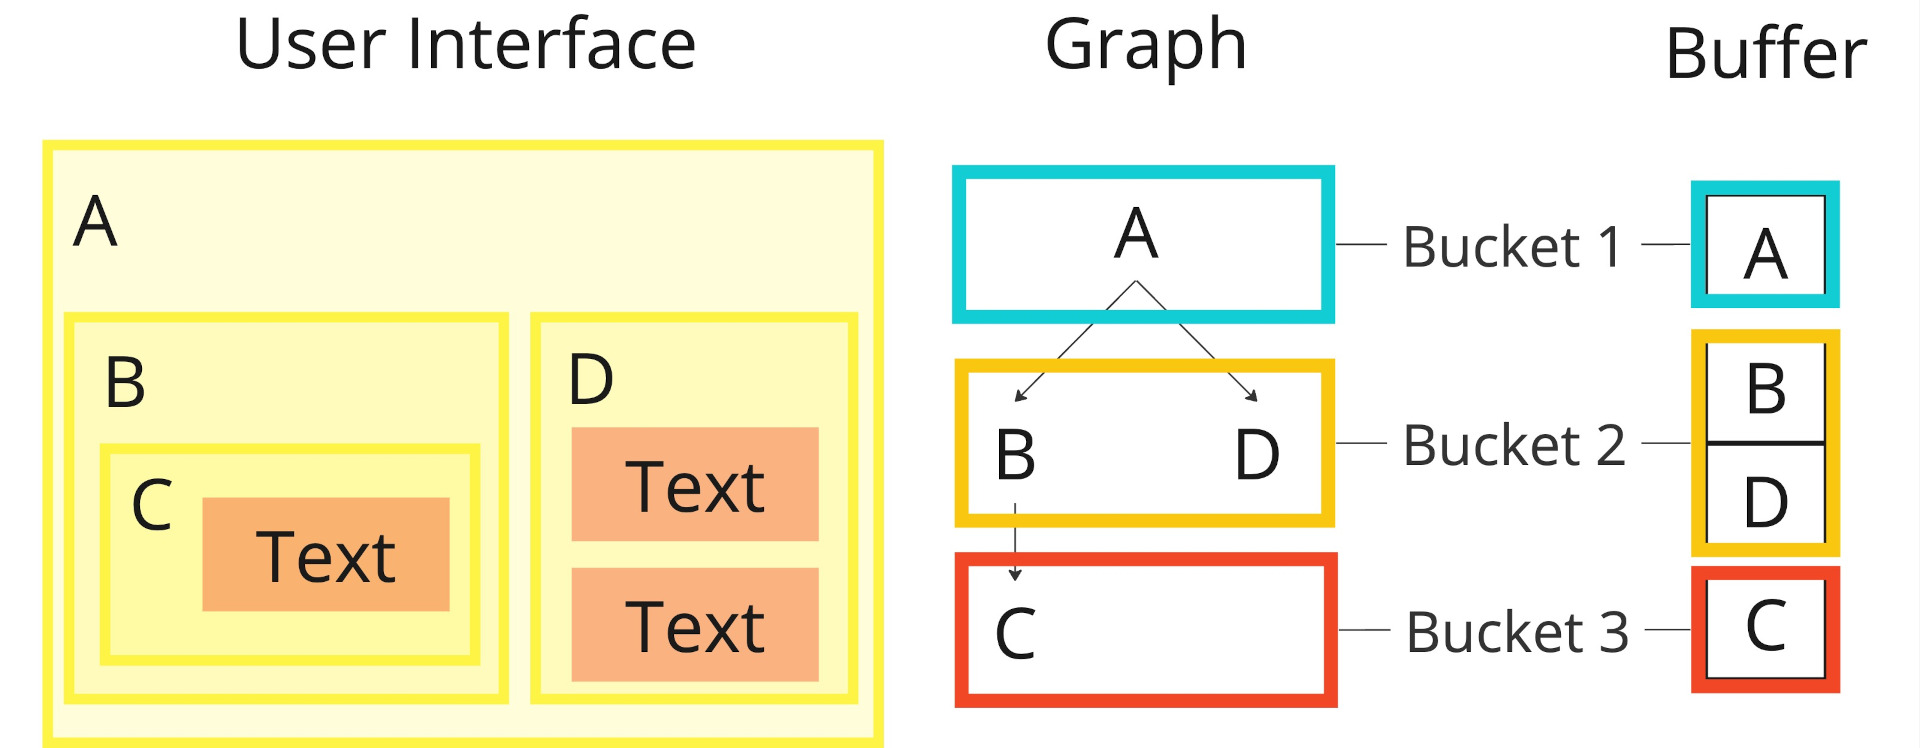 Example of a user interface, the corresponding graph, the buckets derived from the graph, and the buffer allocation